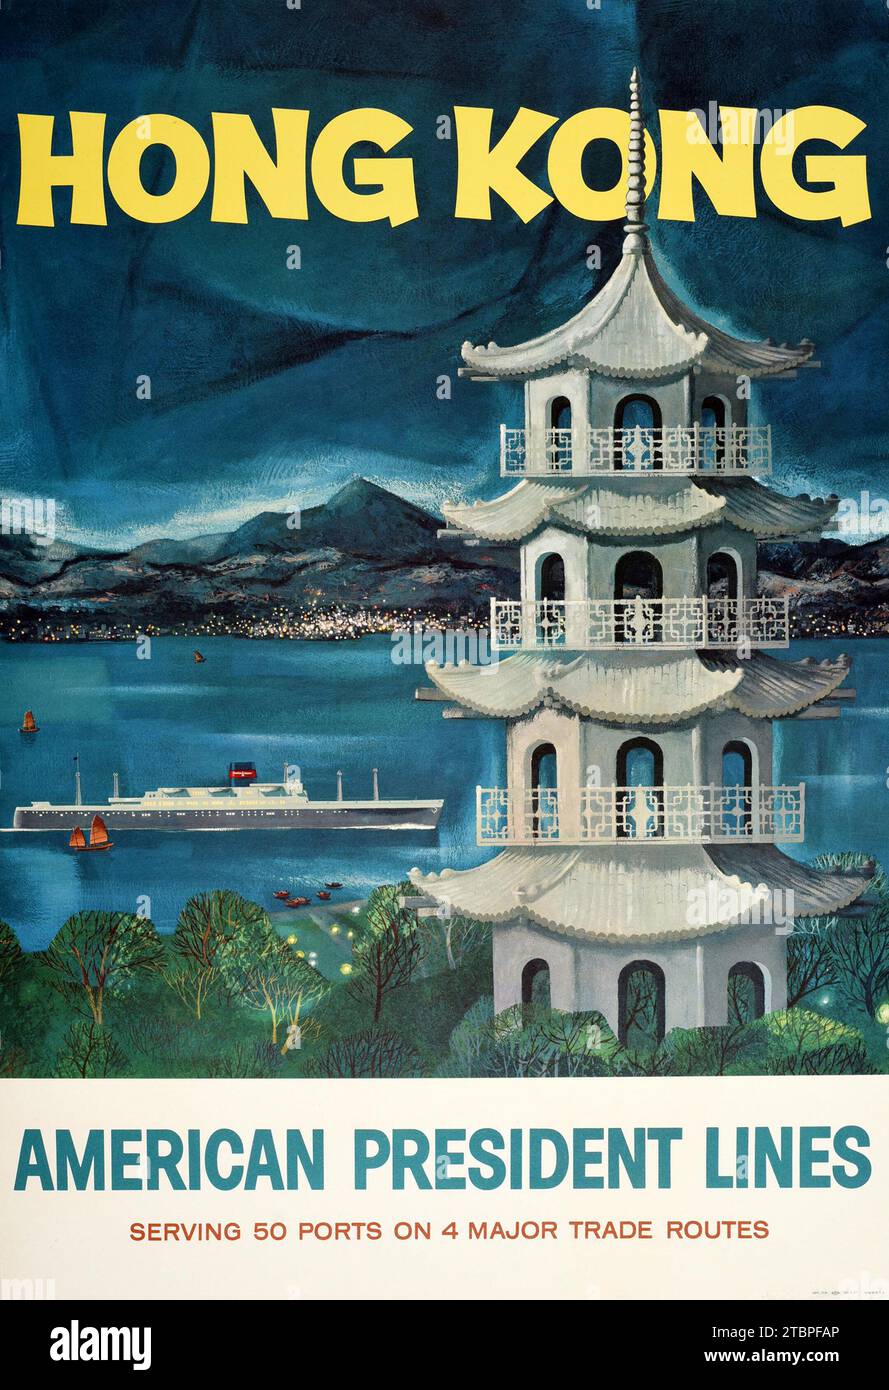 Vintage Asia Travel Poster - Hong Kong - American President Lines 1957 Stock Photo